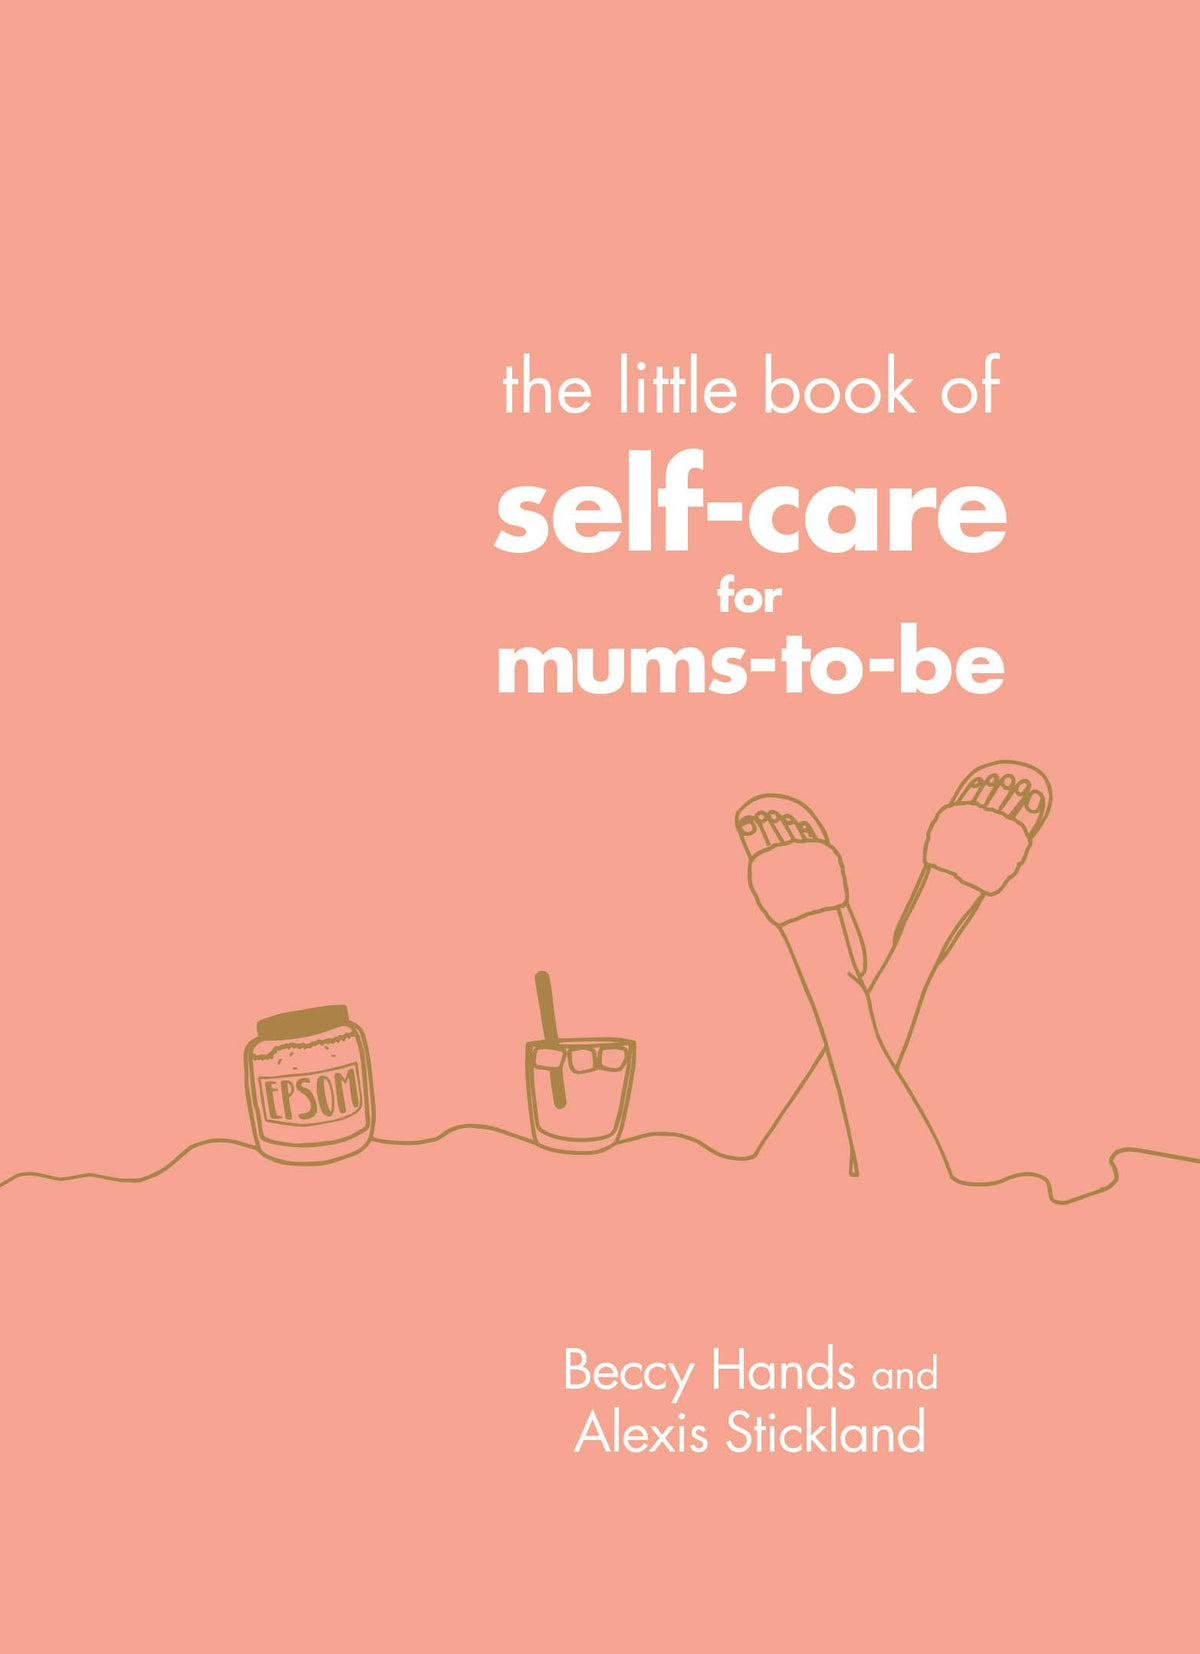 Book - Little Book of Self-Care for Mums-to-be